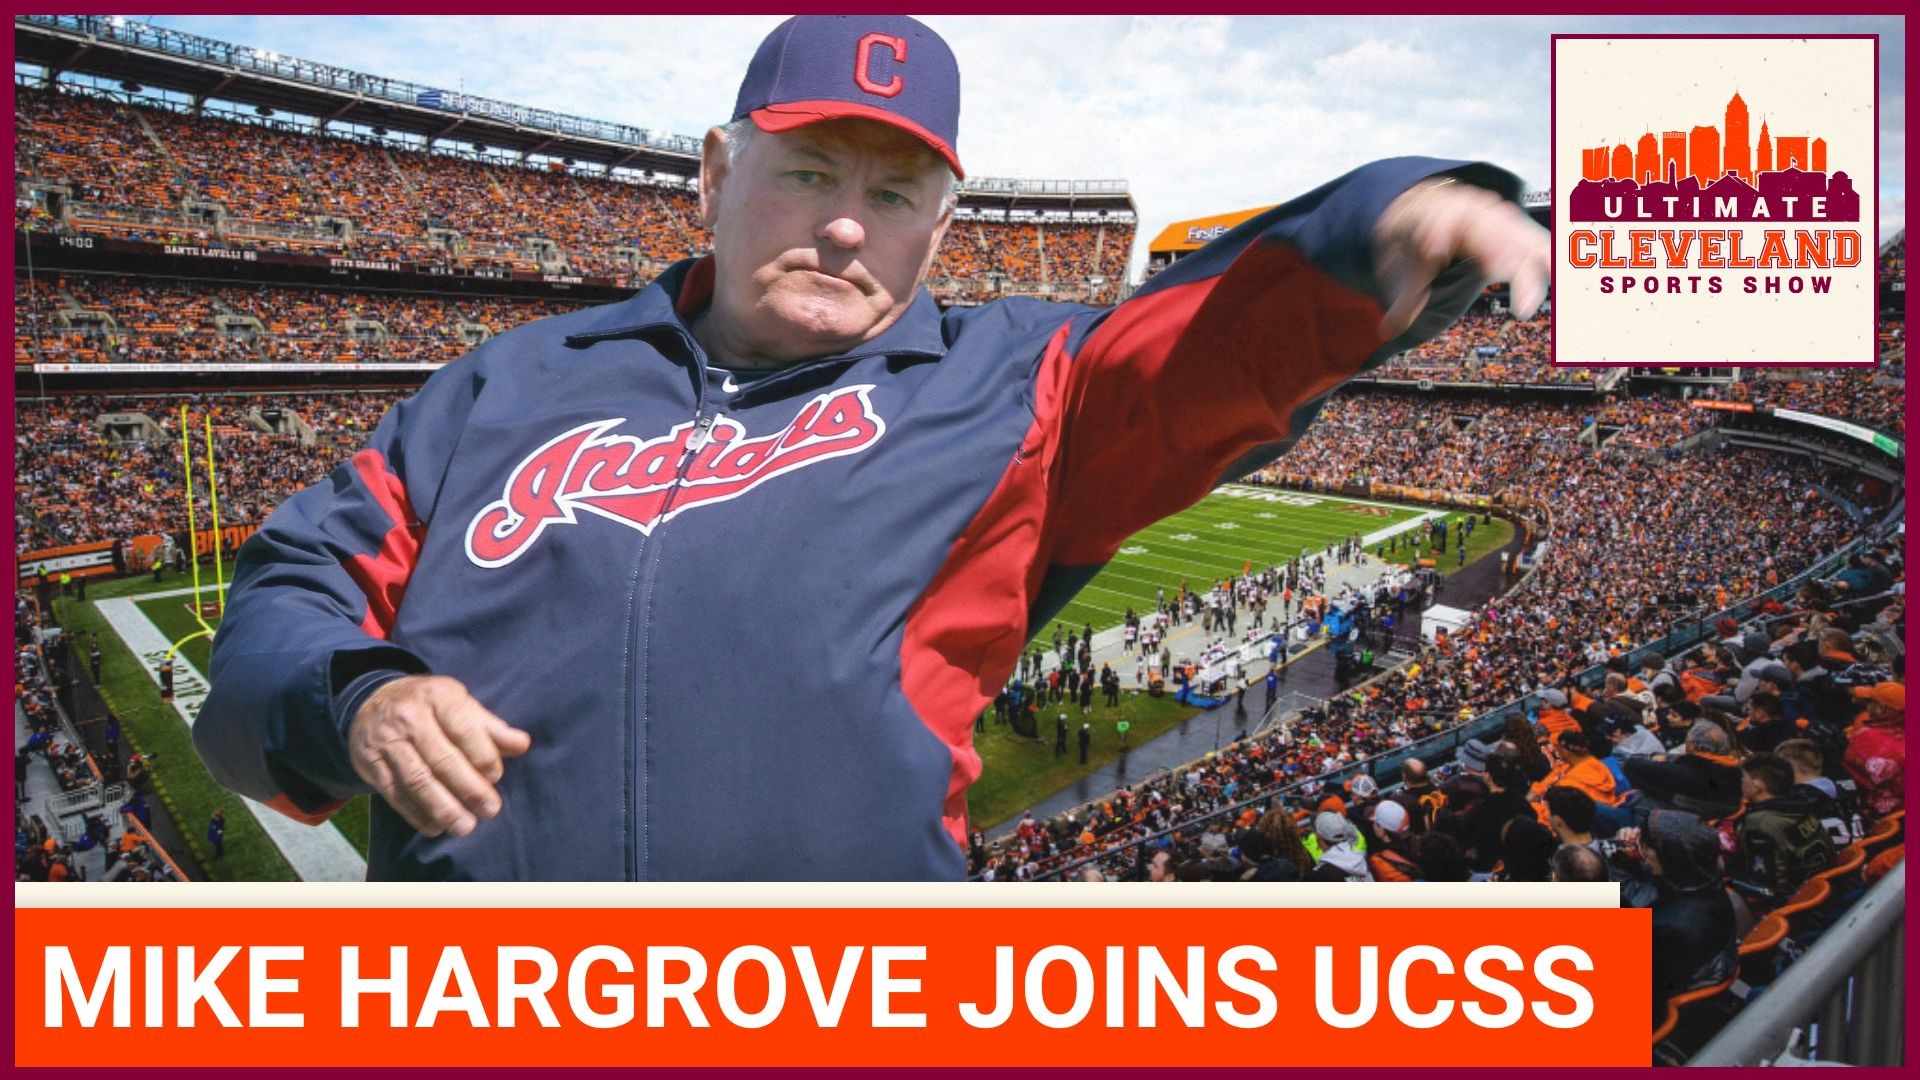 Mike Hargrove joins UCSS